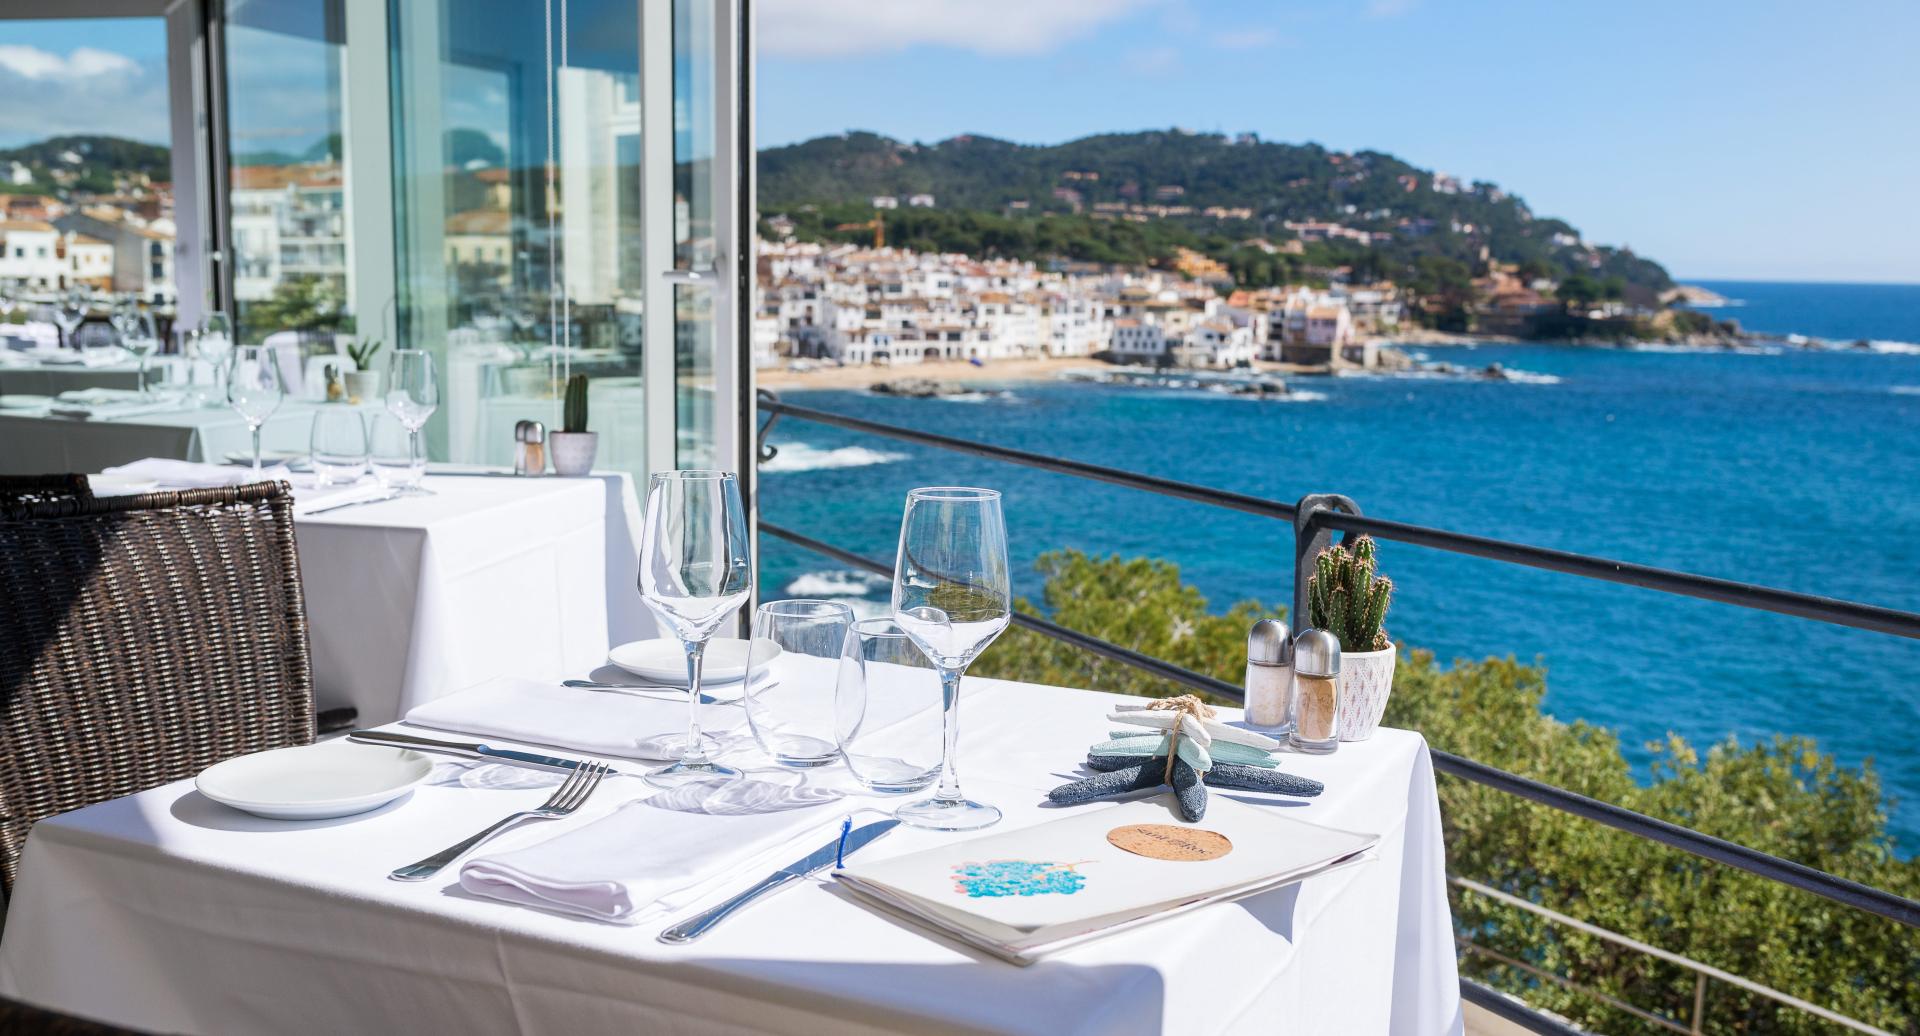 Hotel and Restaurant in the heart of Calella